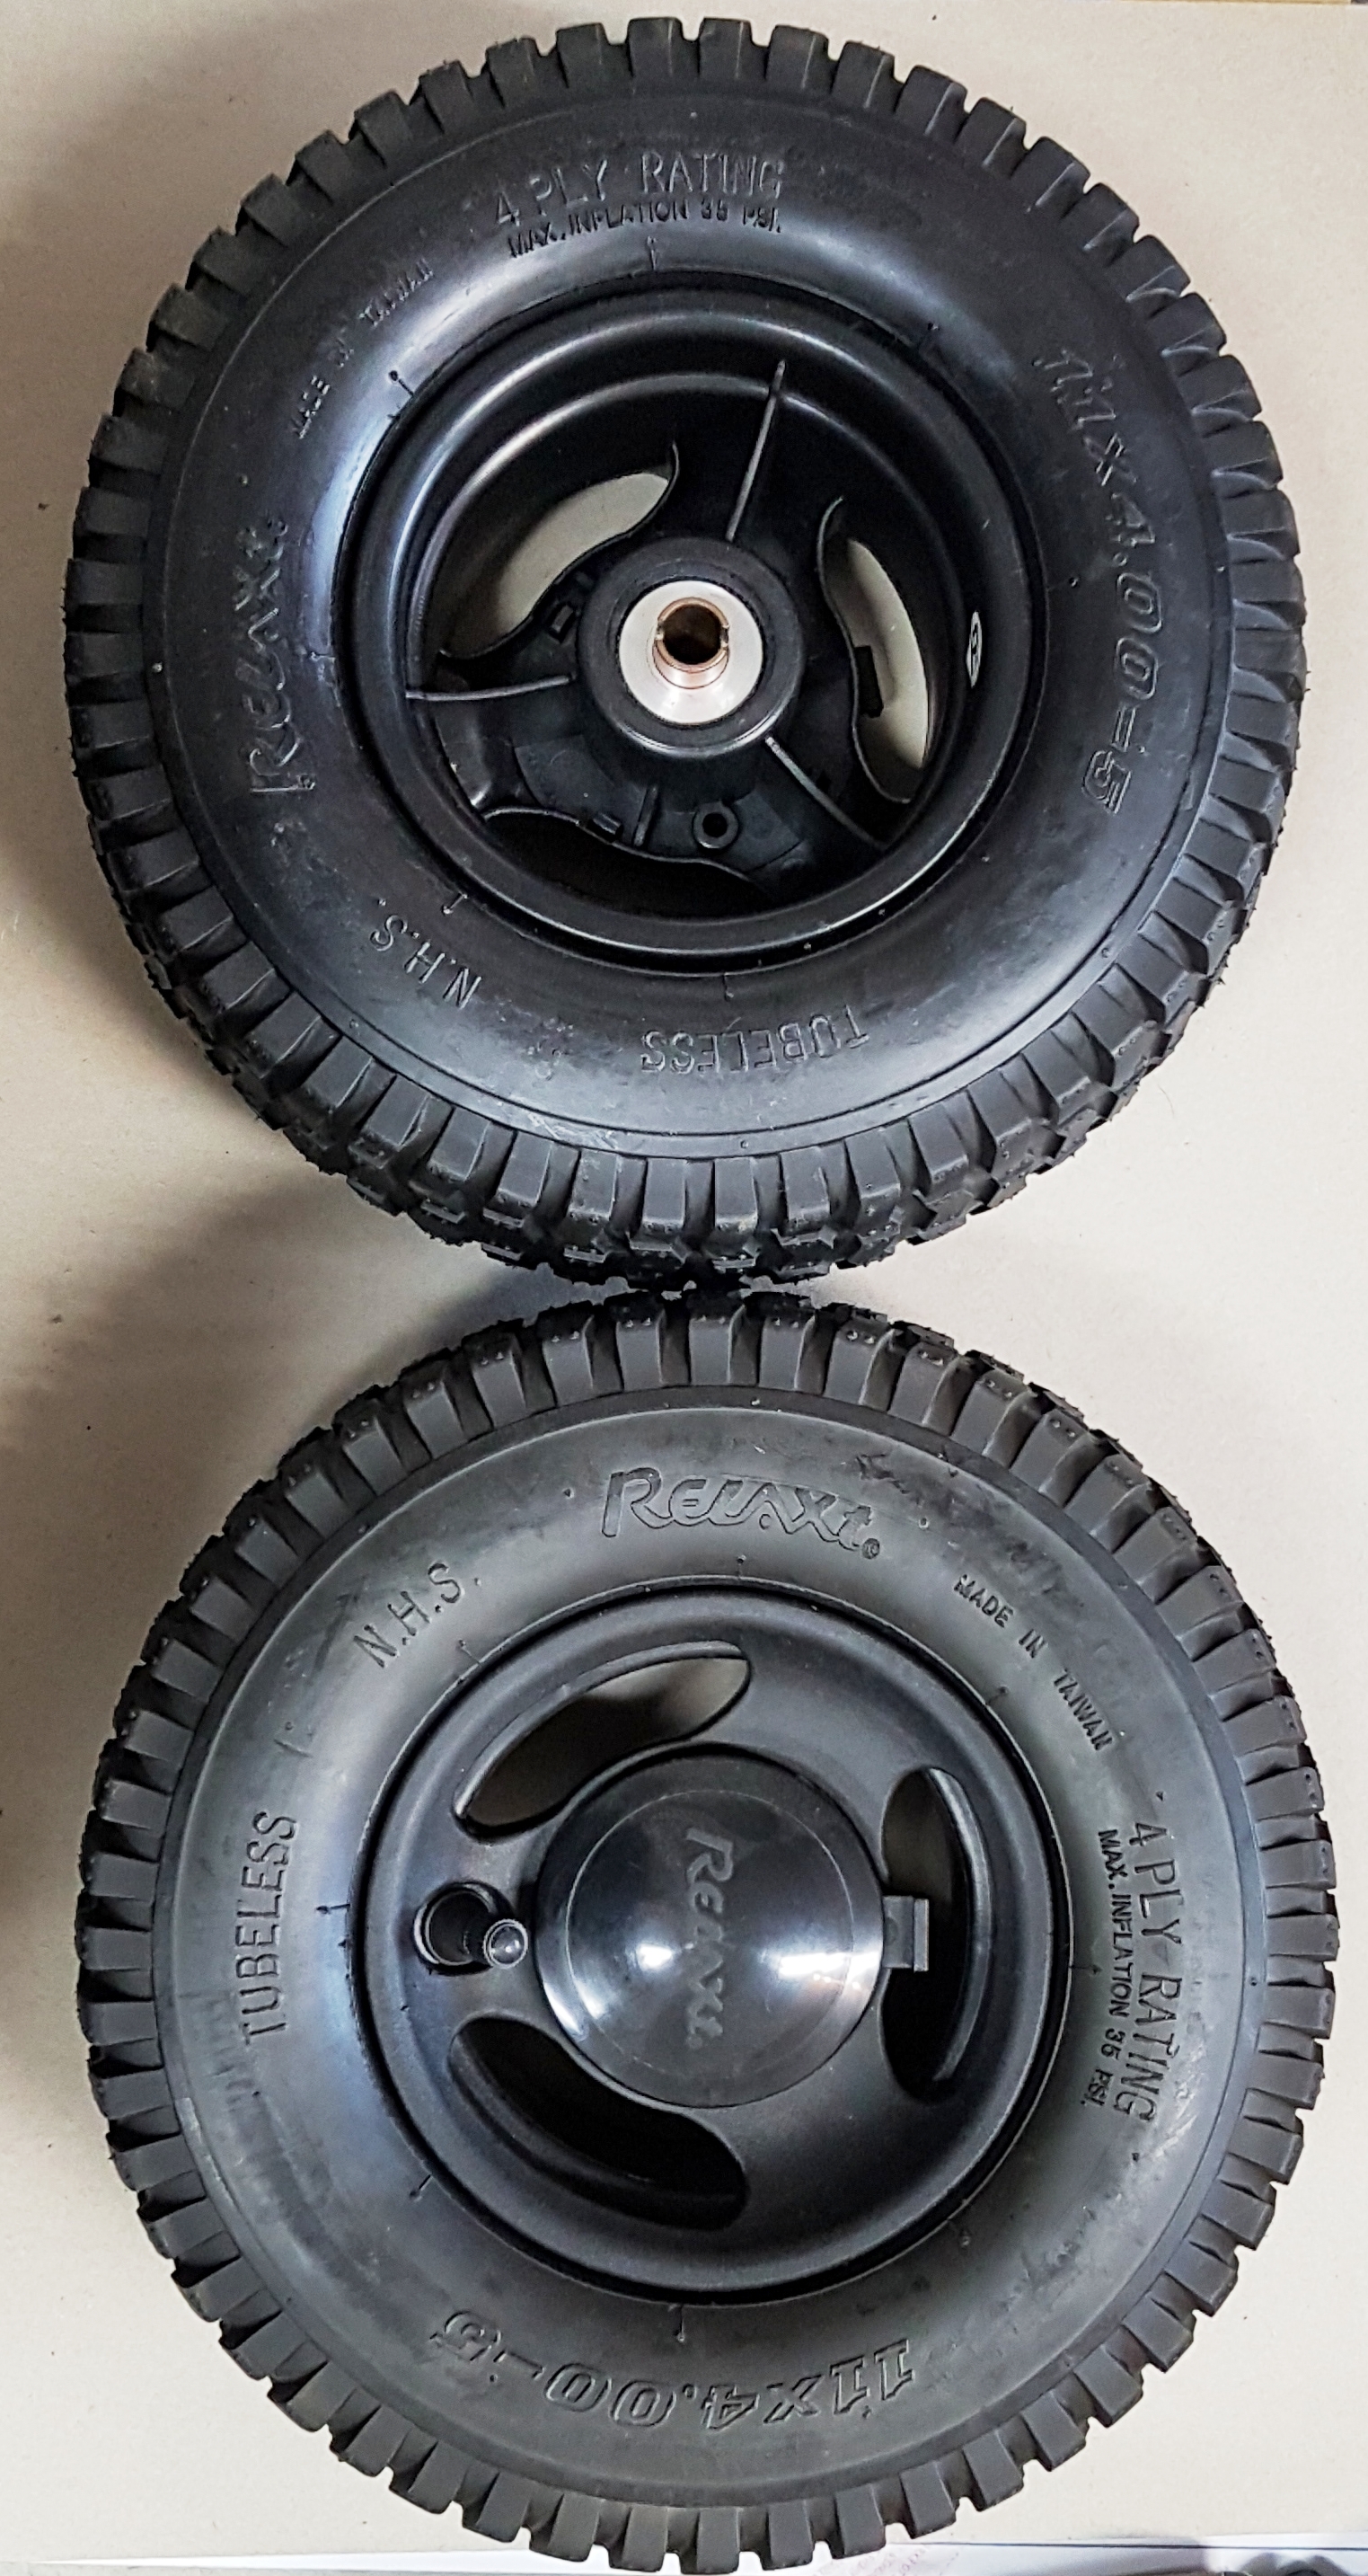 Relaxt Air Wheels with Clutch